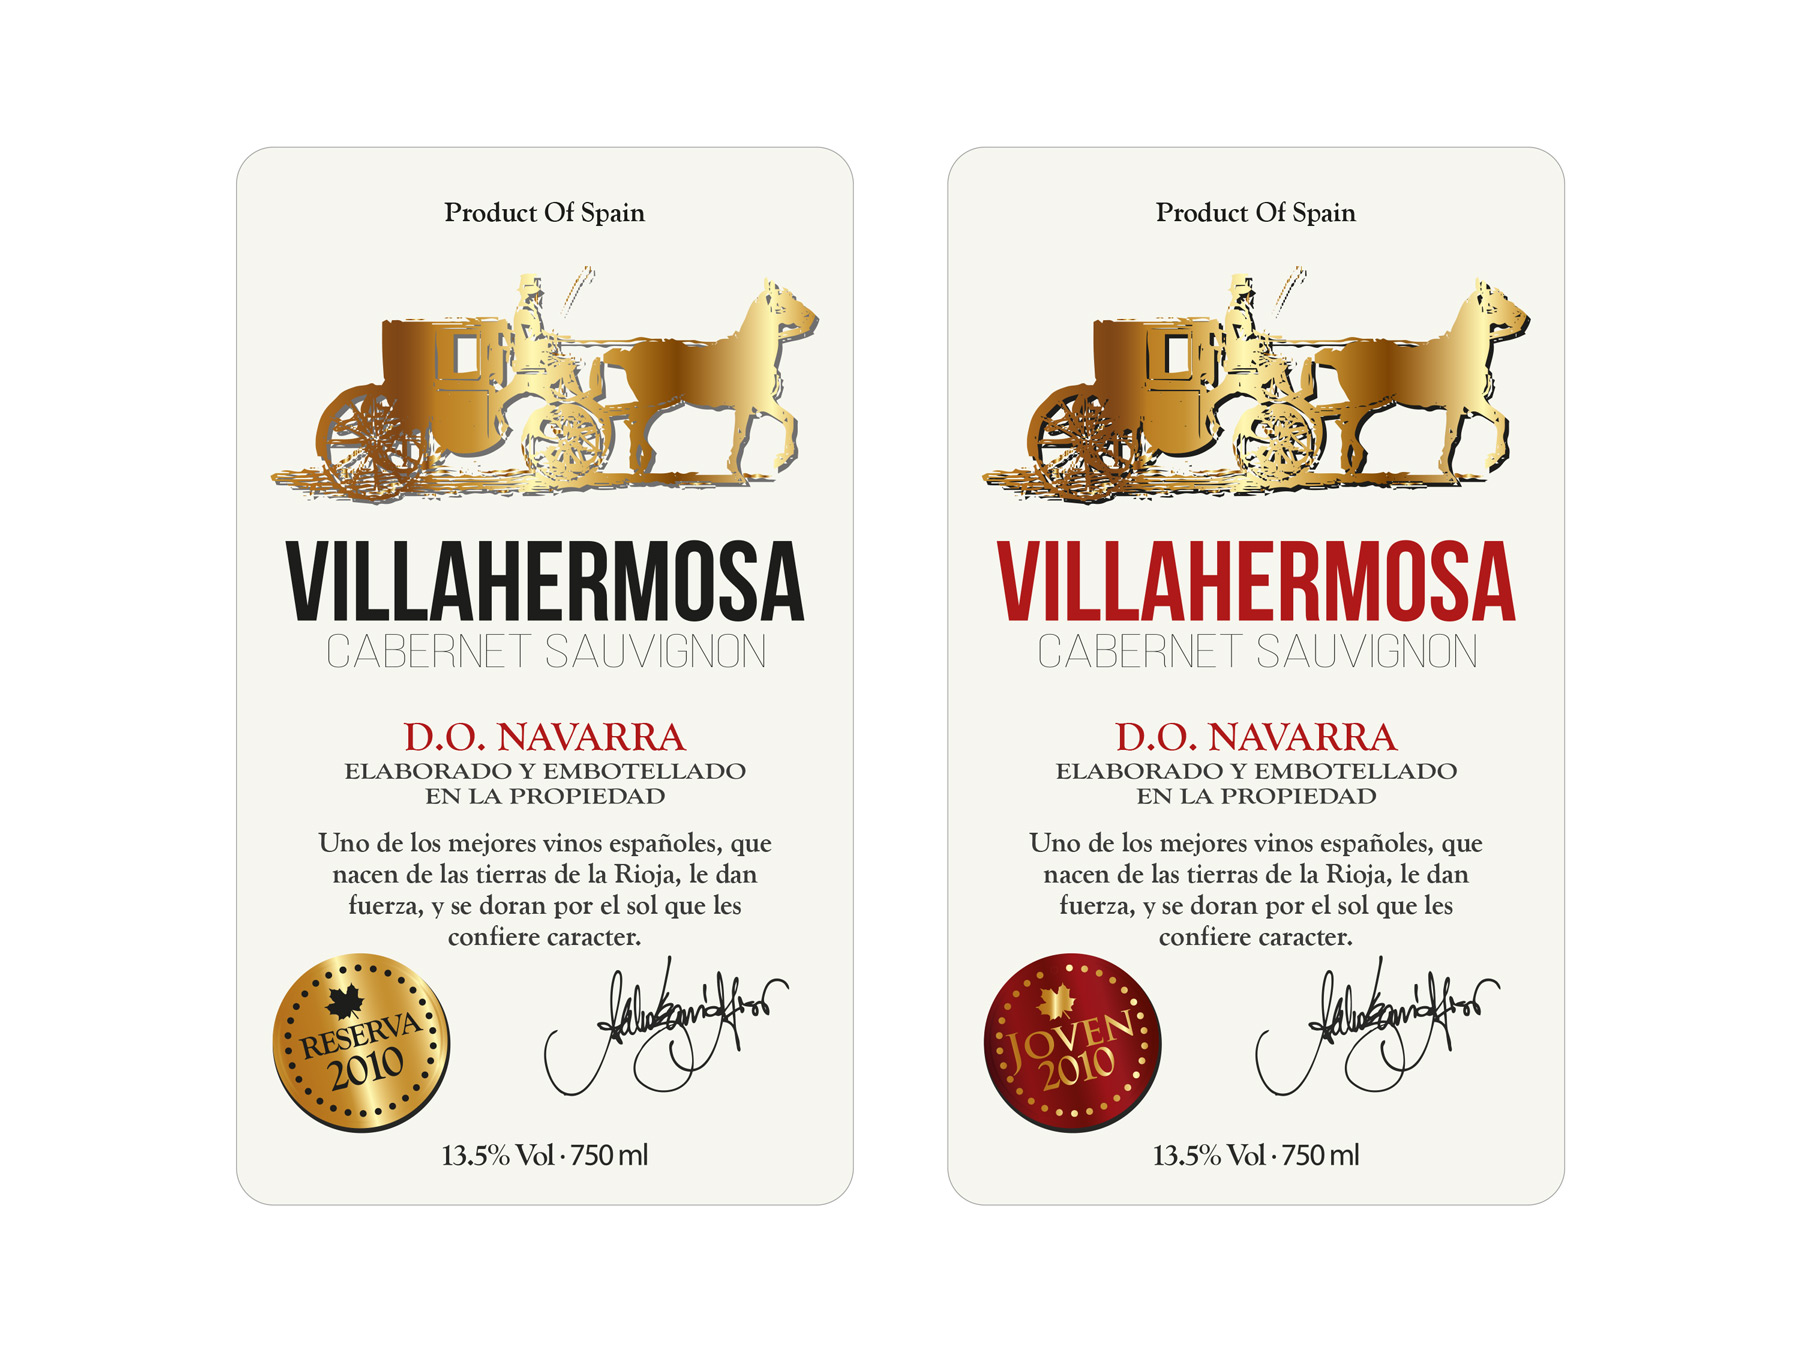 Portfolio of graphic and creative design works on wine labels and packaging for Spanish wine: VILLA HERMOSA for the Chinese market